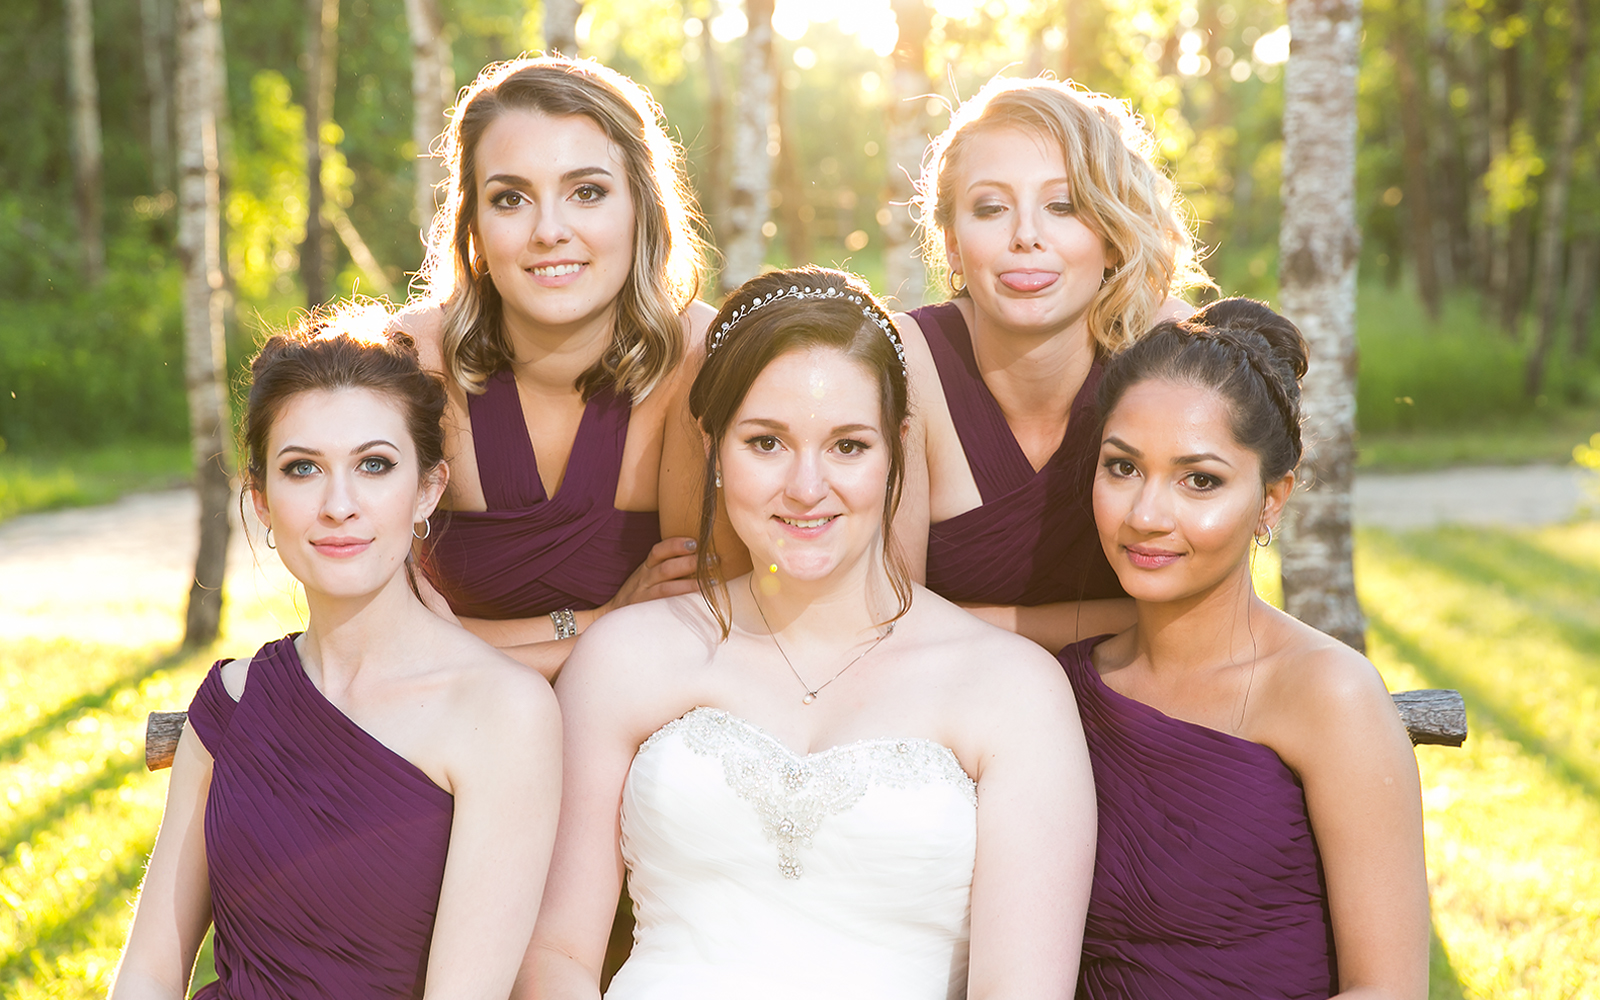 The bride and her bridesmaids with one sticking out her tongue